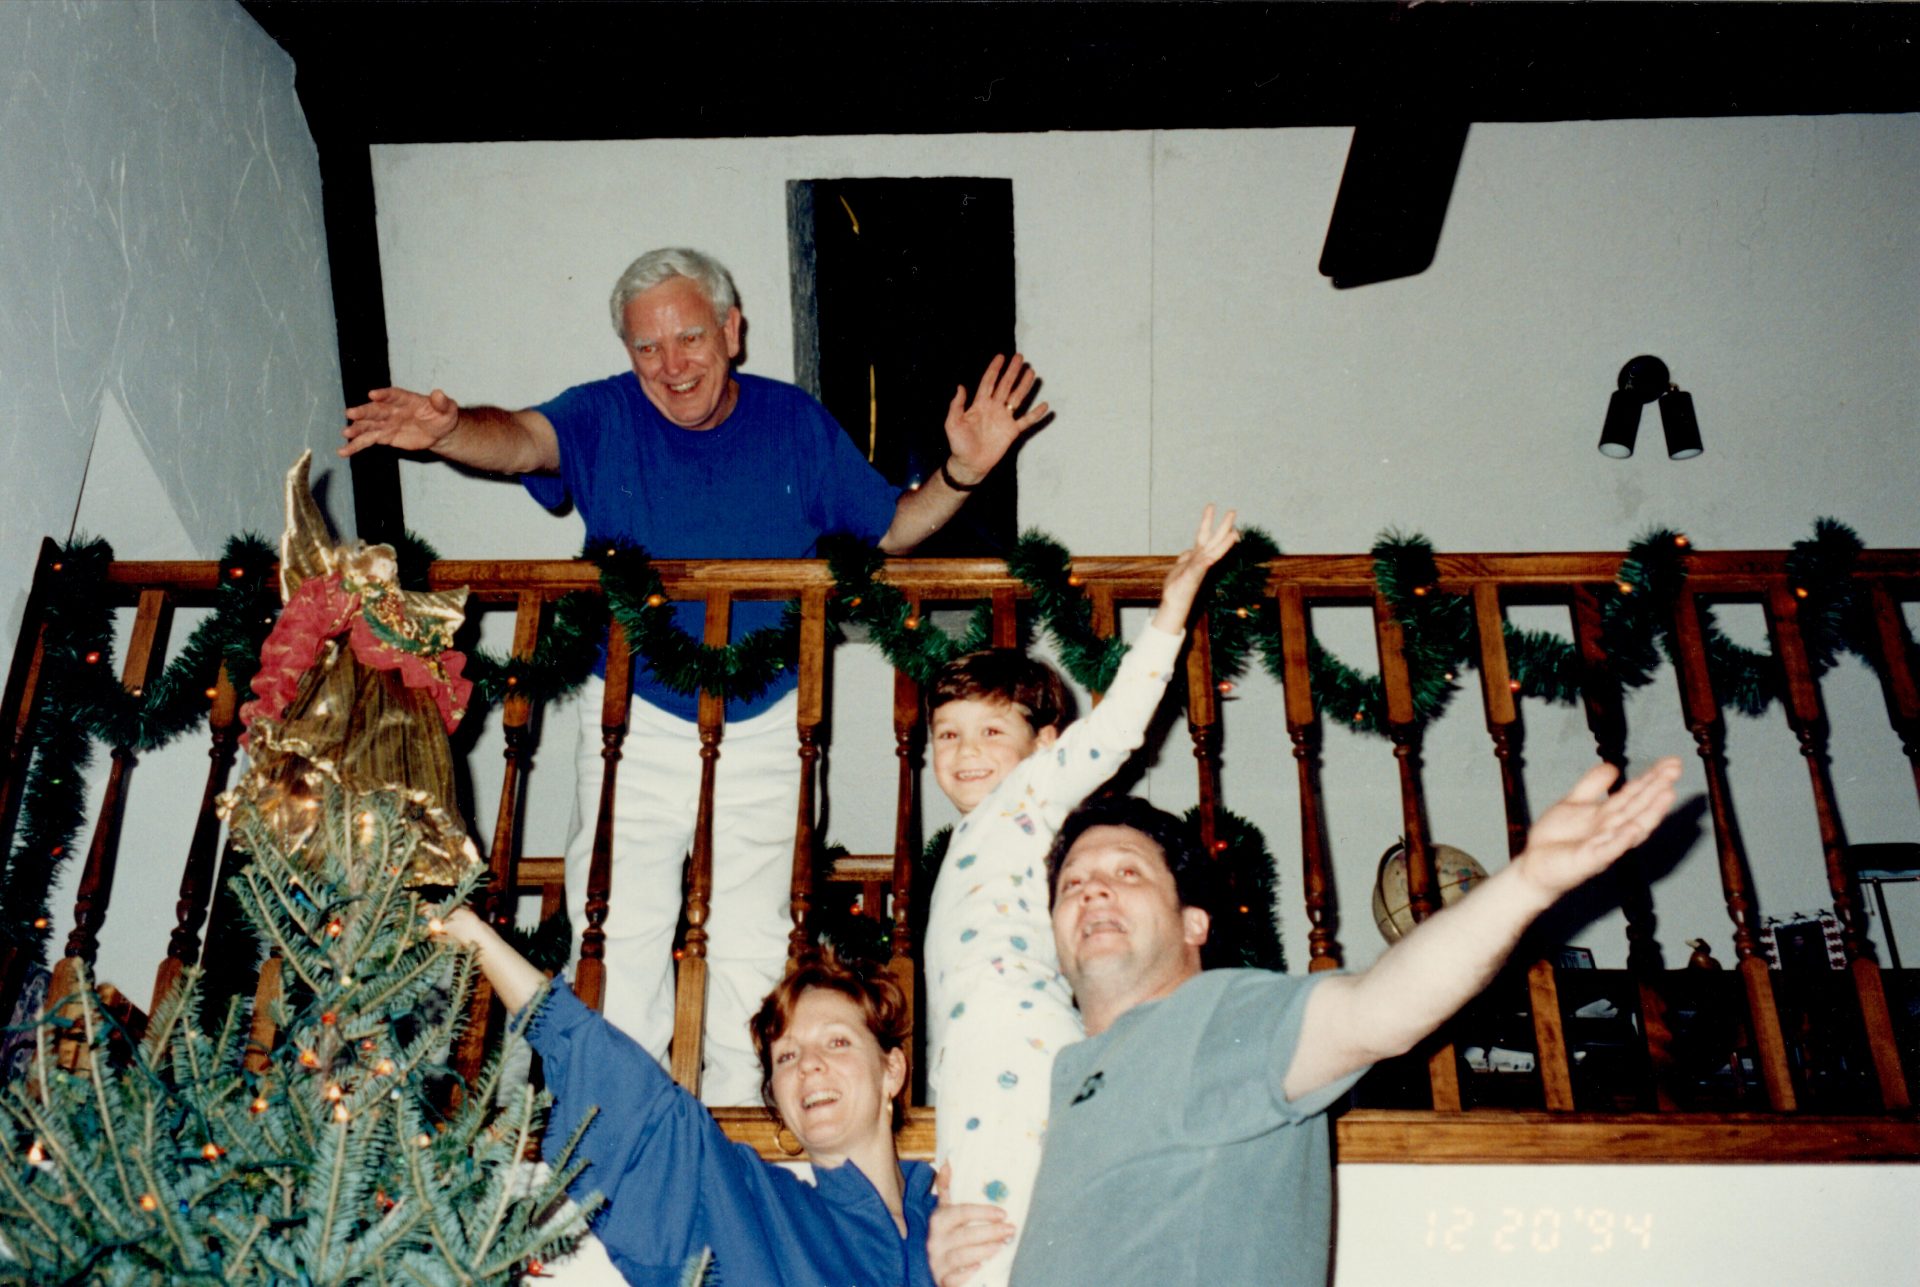 Cherished memories of Dad's love for Christmas!